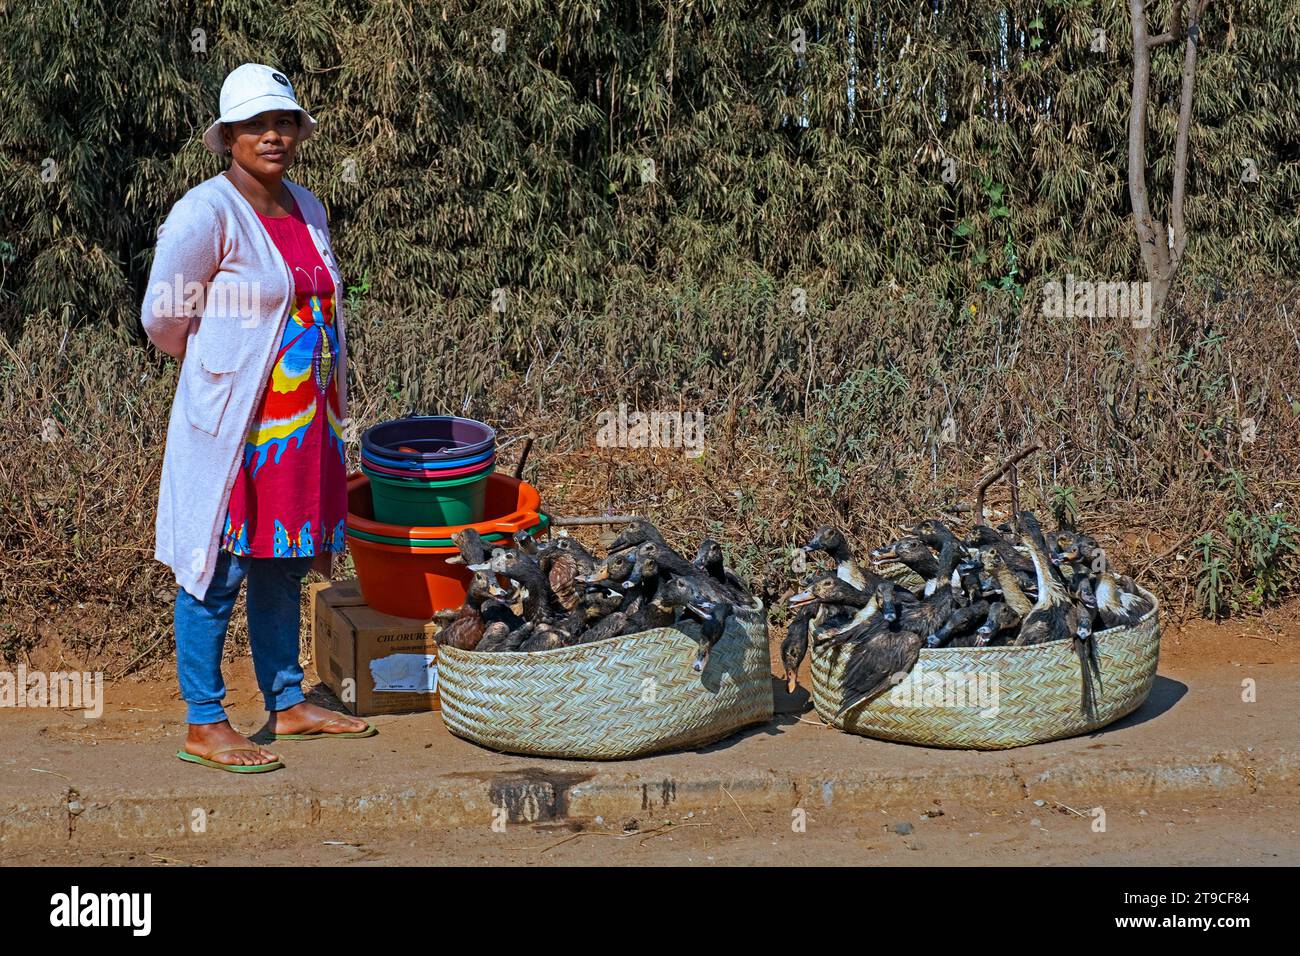 Malagasy woman selling live ducks in baskets along the road near Antsirabe, Vakinankaratra Region, Central Highlands, Madagascar, Africa Stock Photo